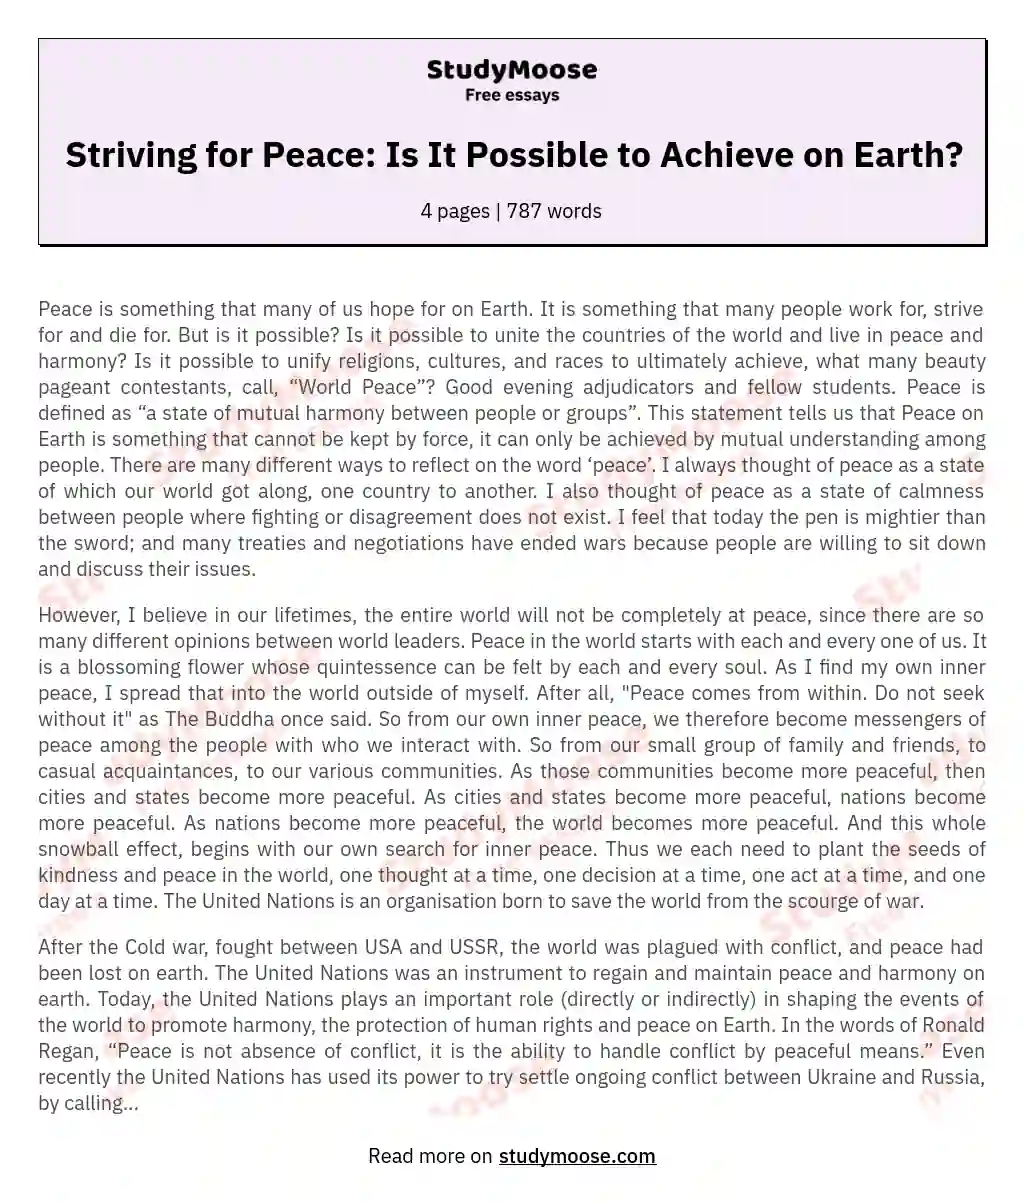 Striving for Peace: Is It Possible to Achieve on Earth? essay